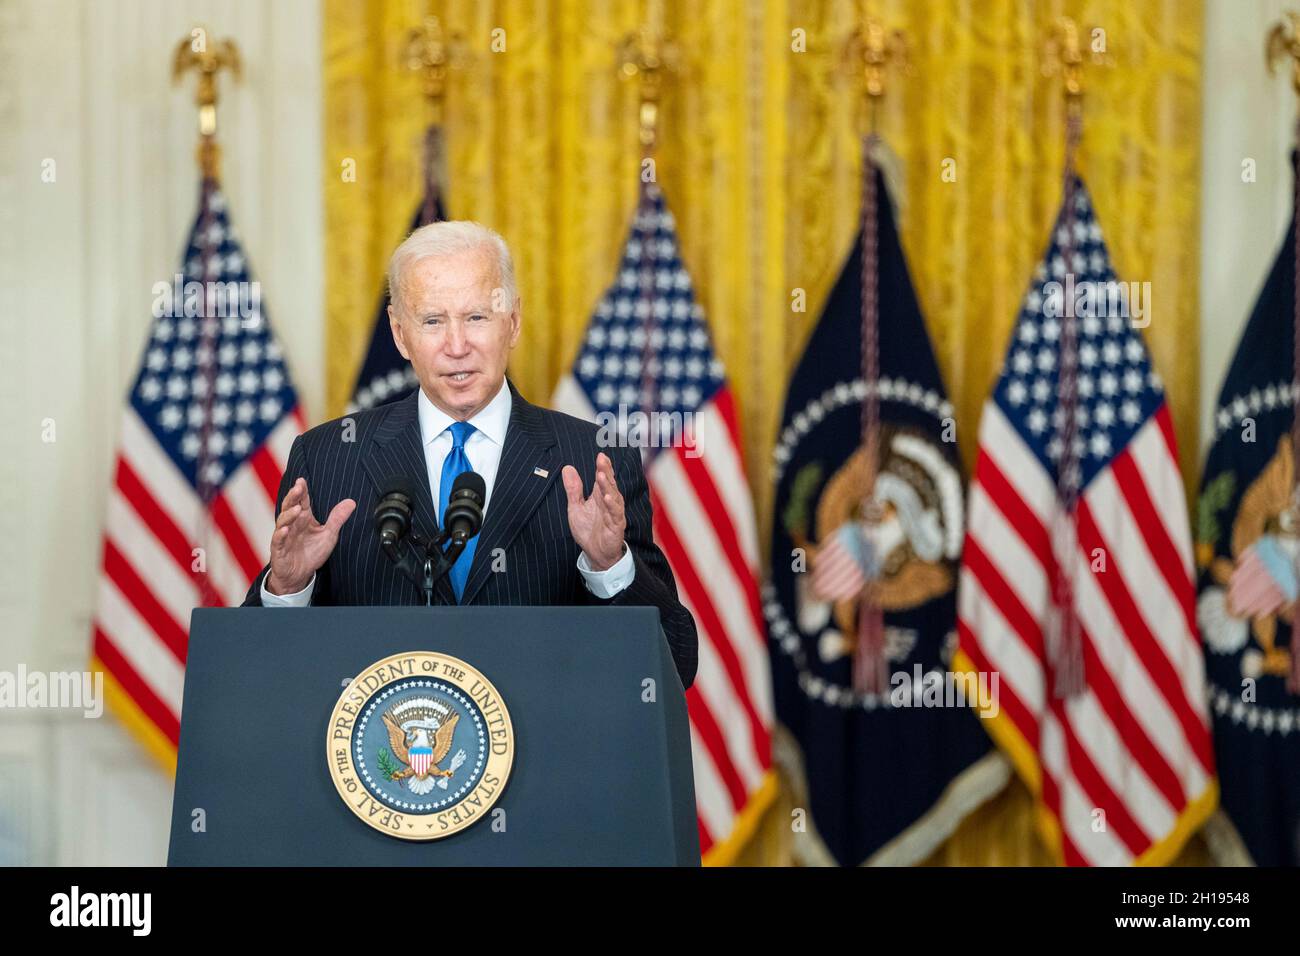 Washington, United States of America. 13 October, 2021. U.S President Joe Biden delivers remarks on the global supply chains from the East Room of the White House October 13, 2021 in Washington, D.C.  Credit: Adam Schultz/White House Photo/Alamy Live News Stock Photo